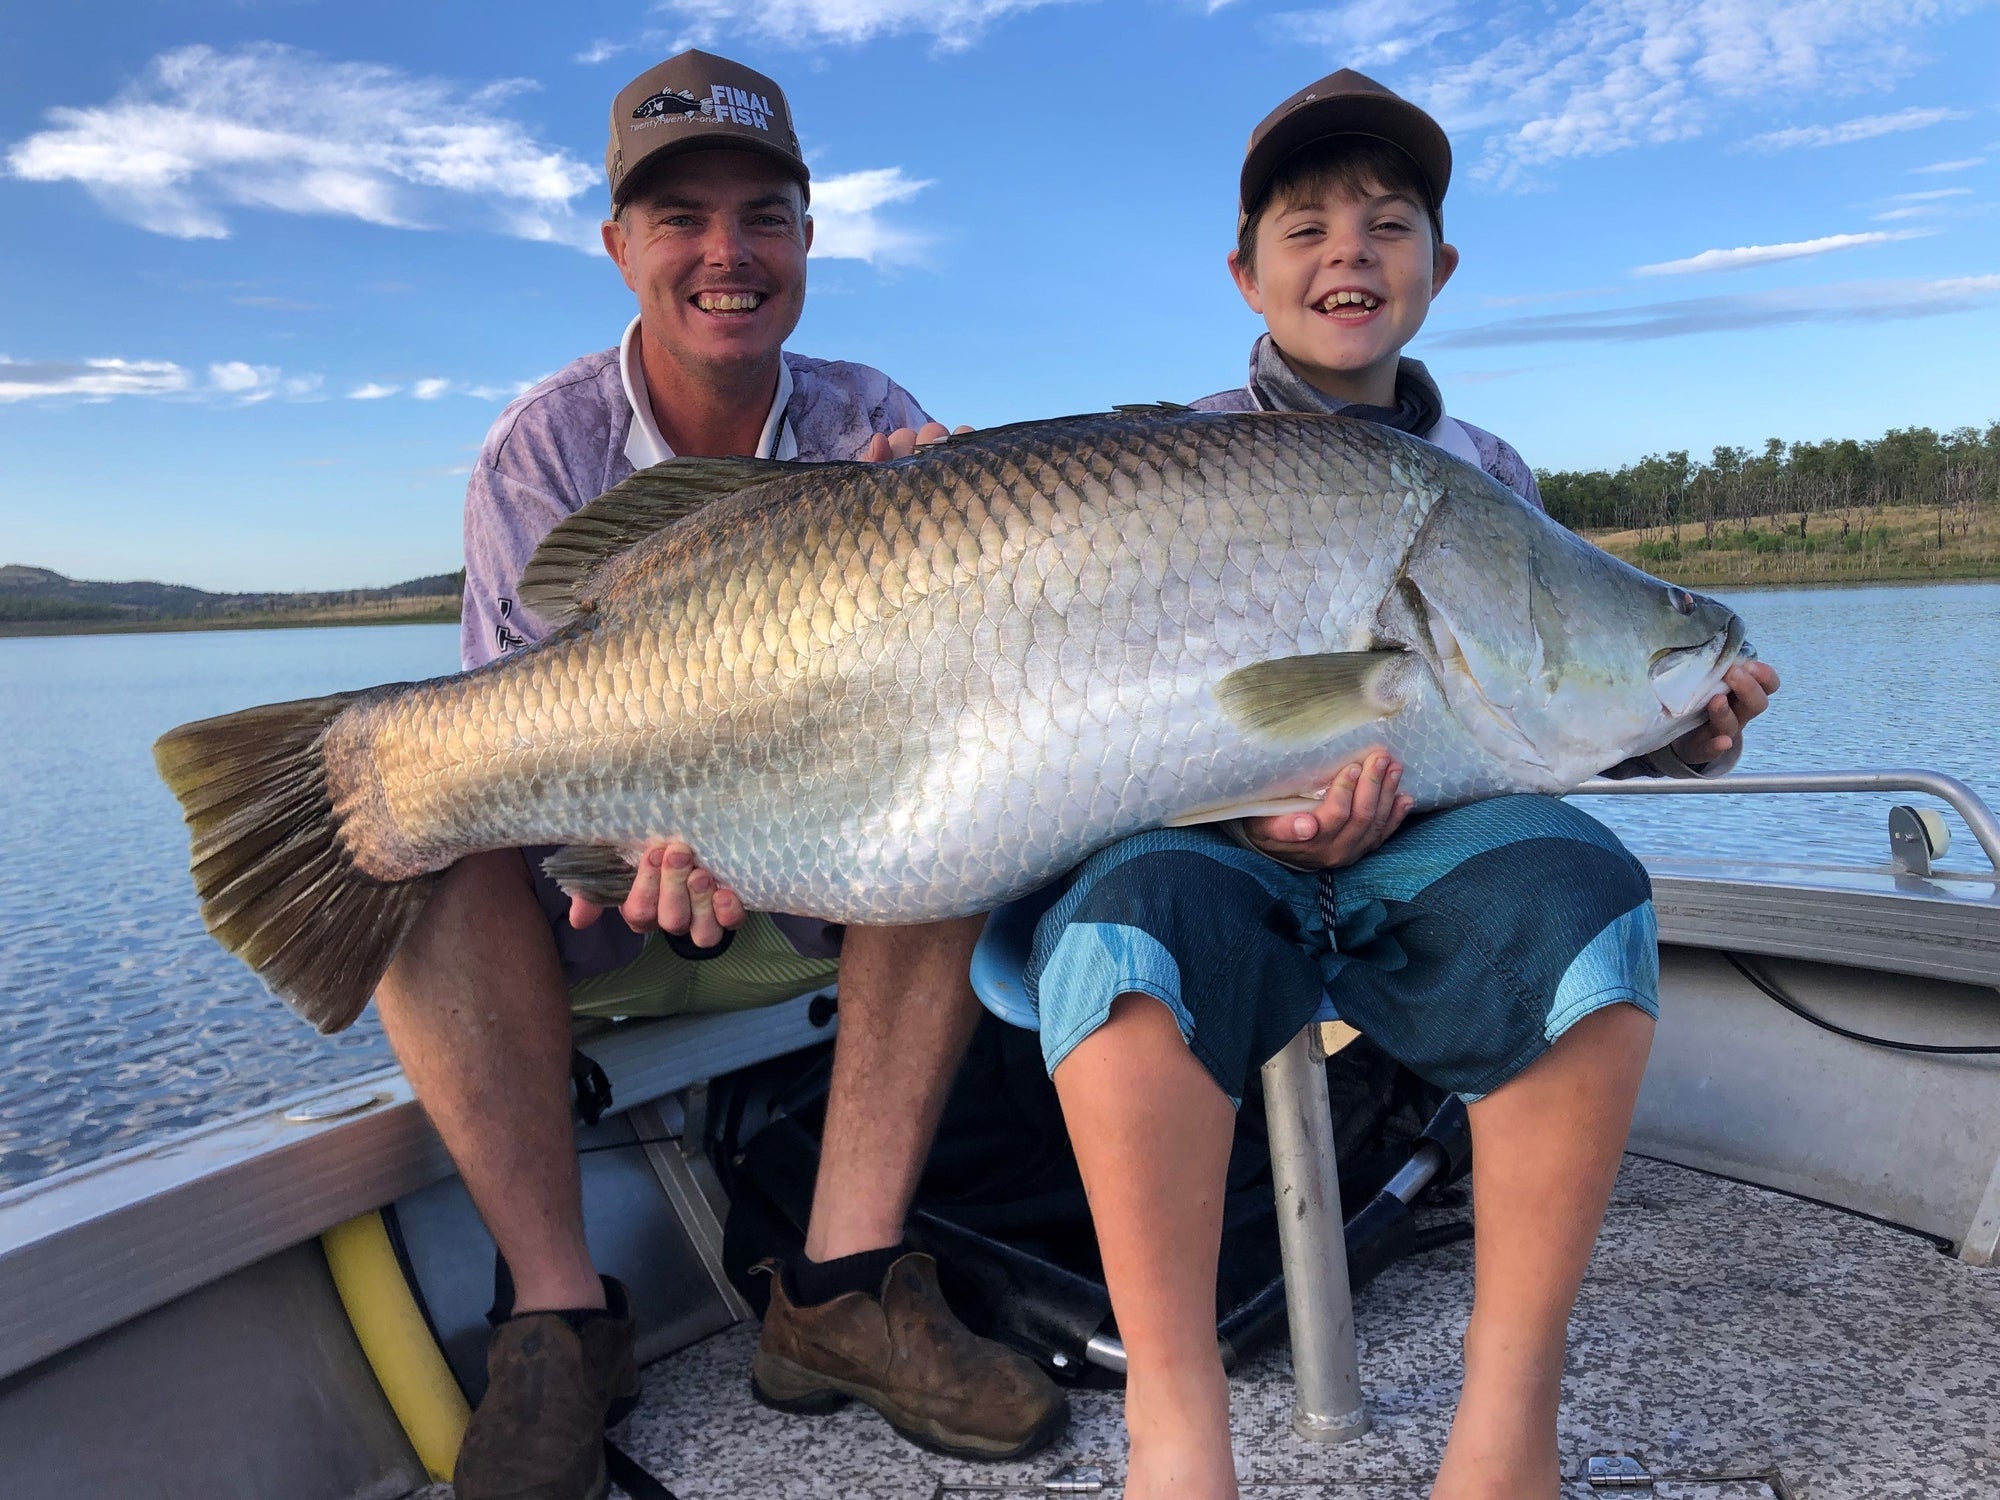 Weekly Fishing Report - 28th April 2022